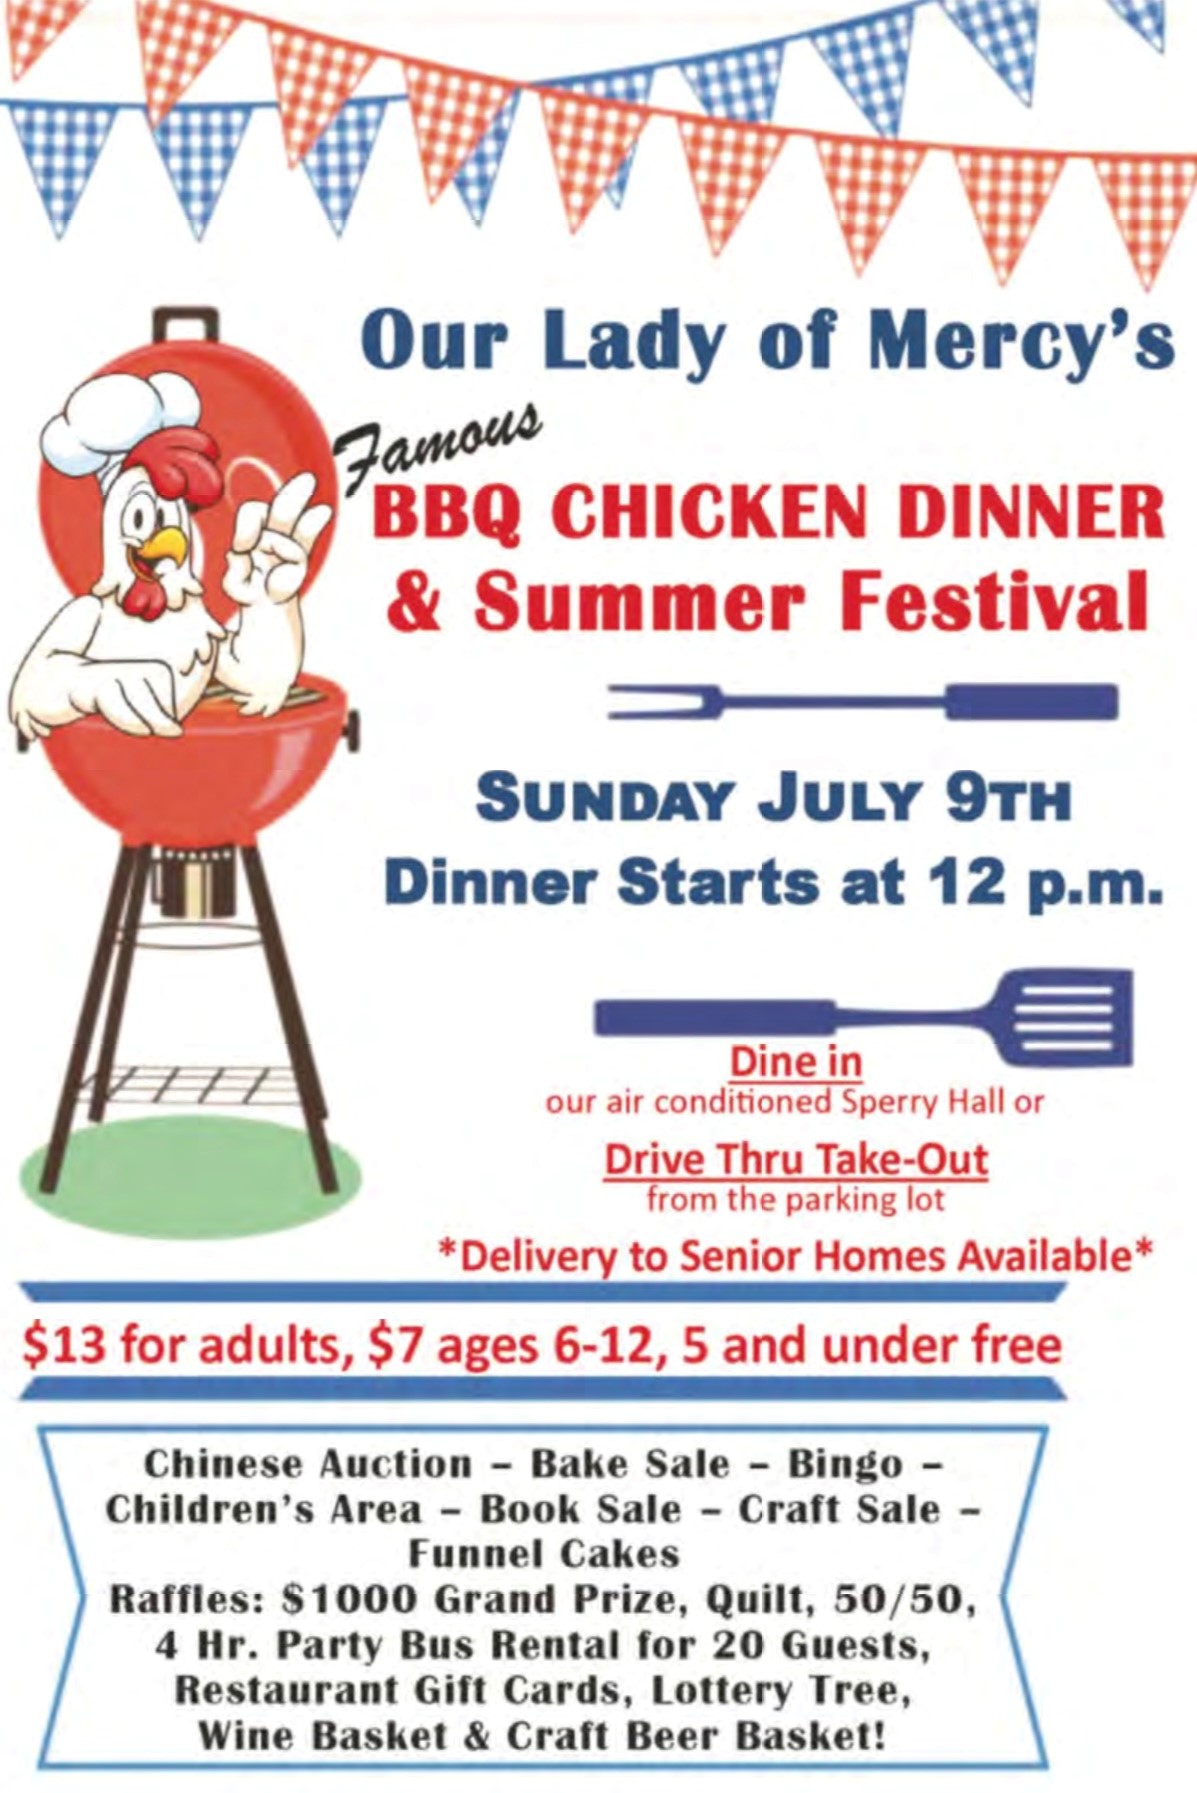 Our Lady of Mercy's BBQ Chicken Dinner & Summer Festival